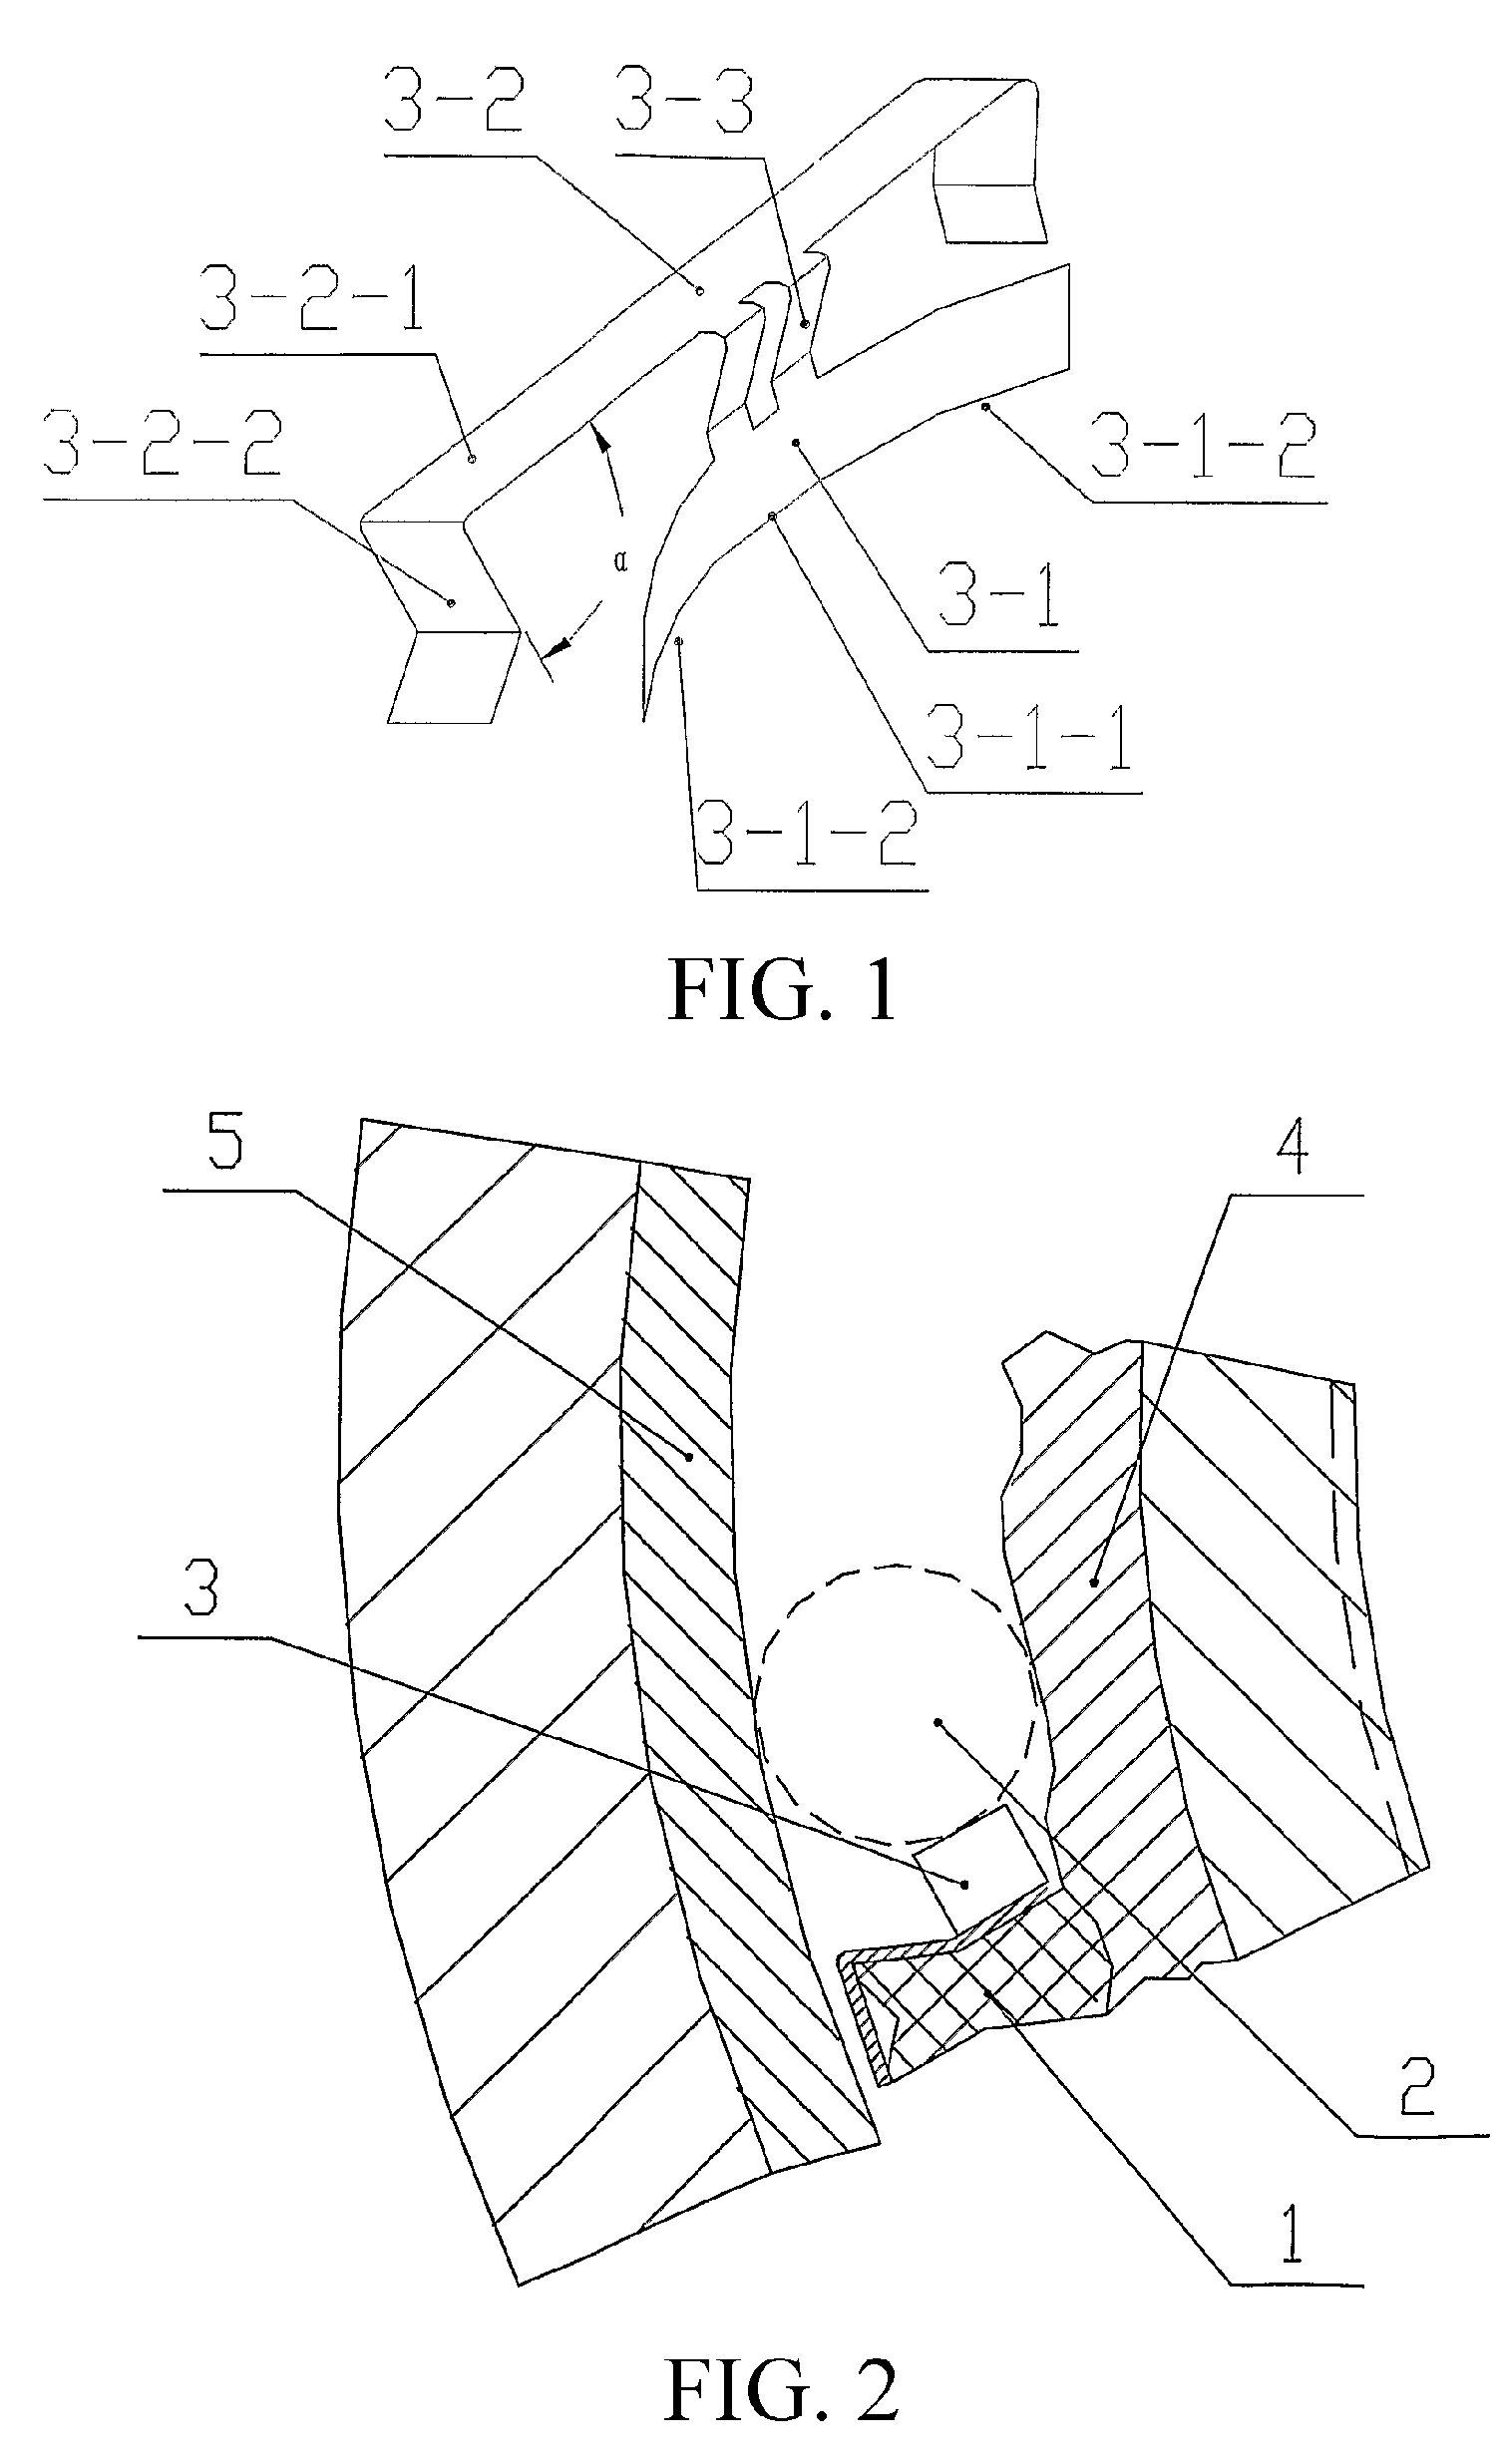 Spring leaf and overrunning clutch provided with the same